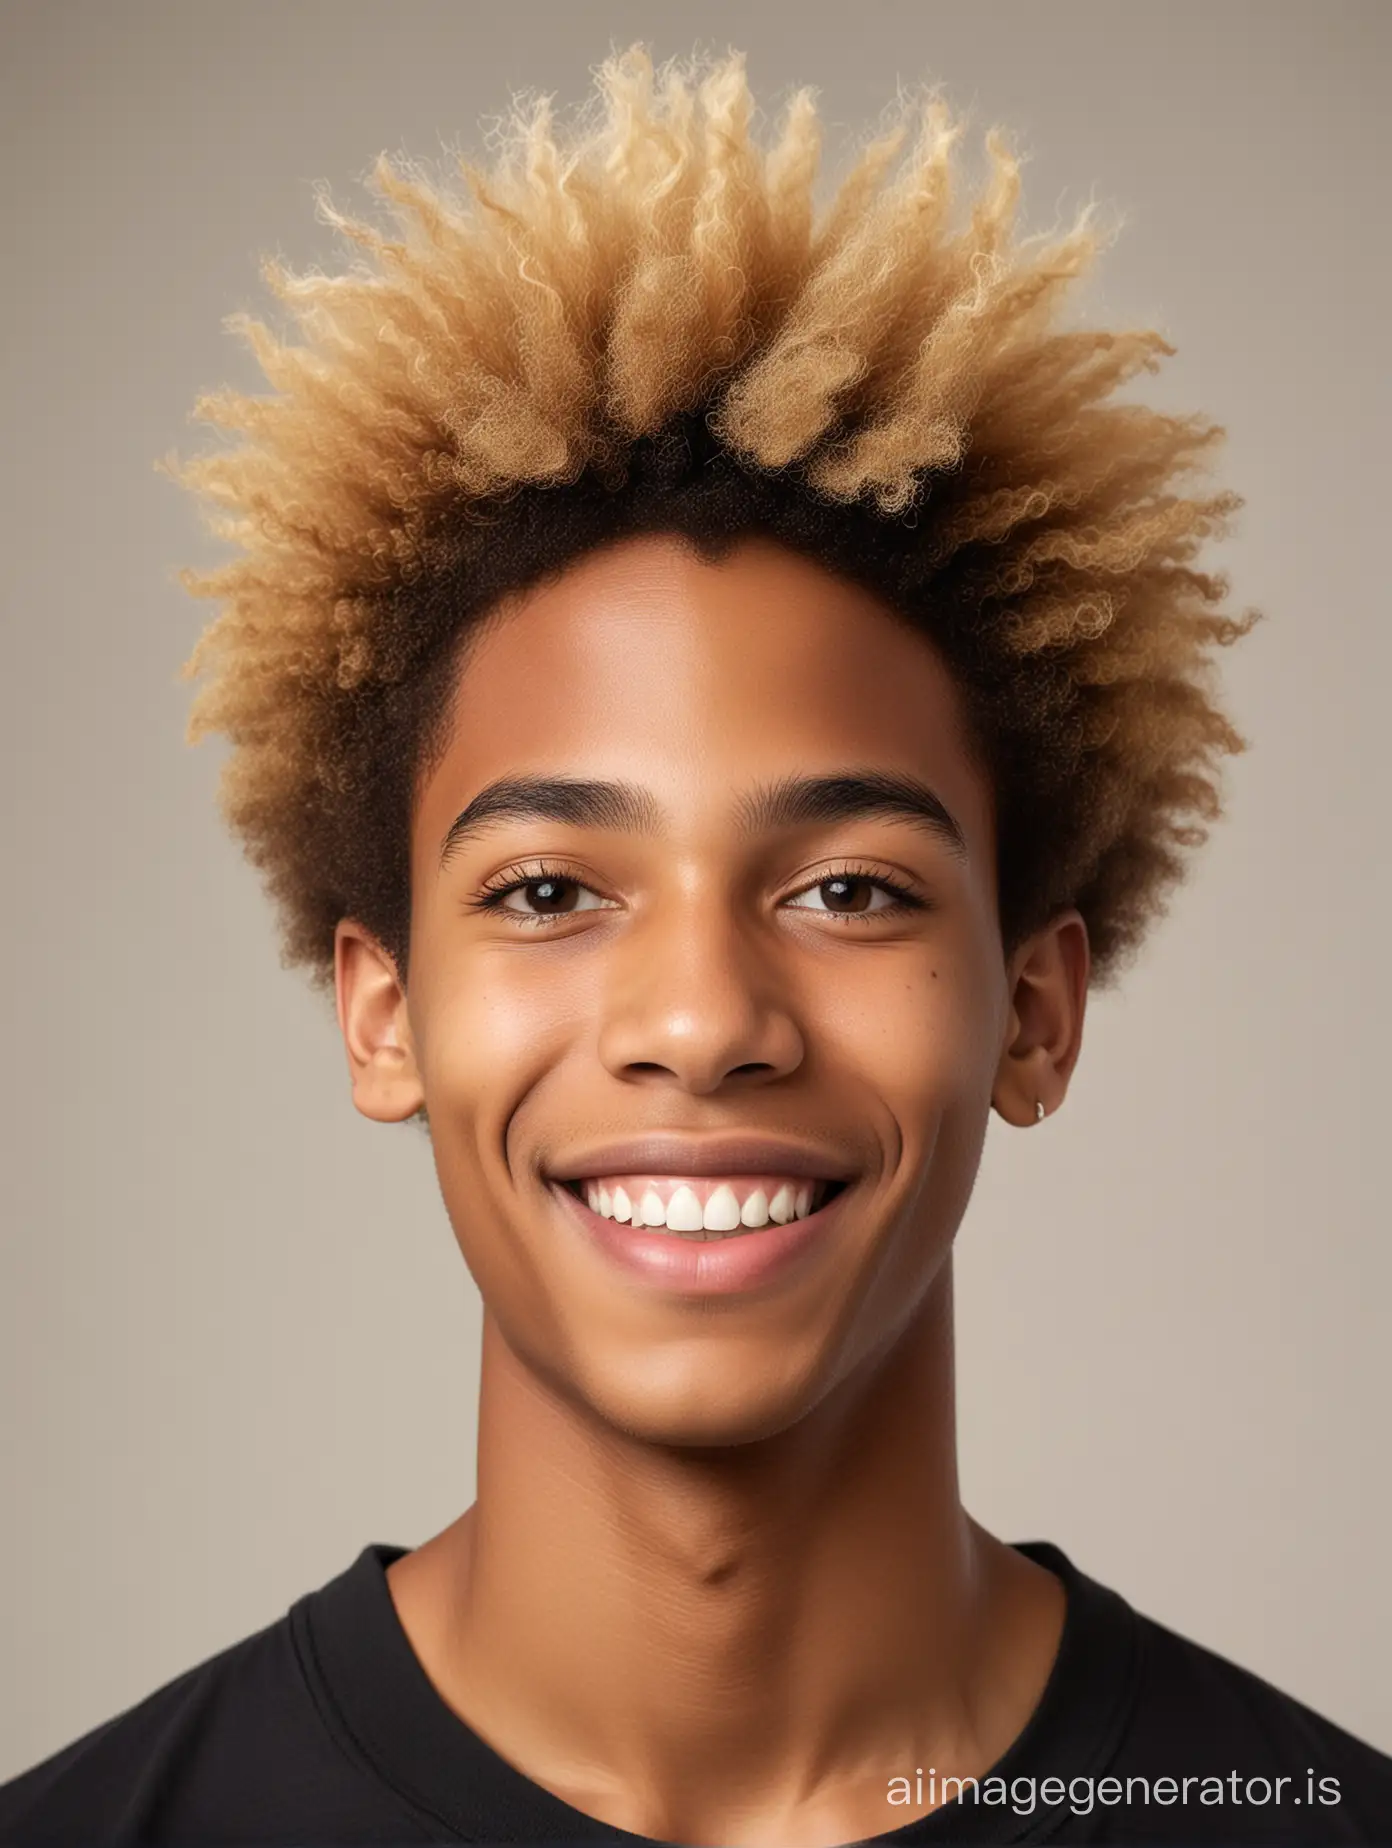 Smiling-Black-Teenage-Boy-with-Blonde-Afro-Hair-Portrait